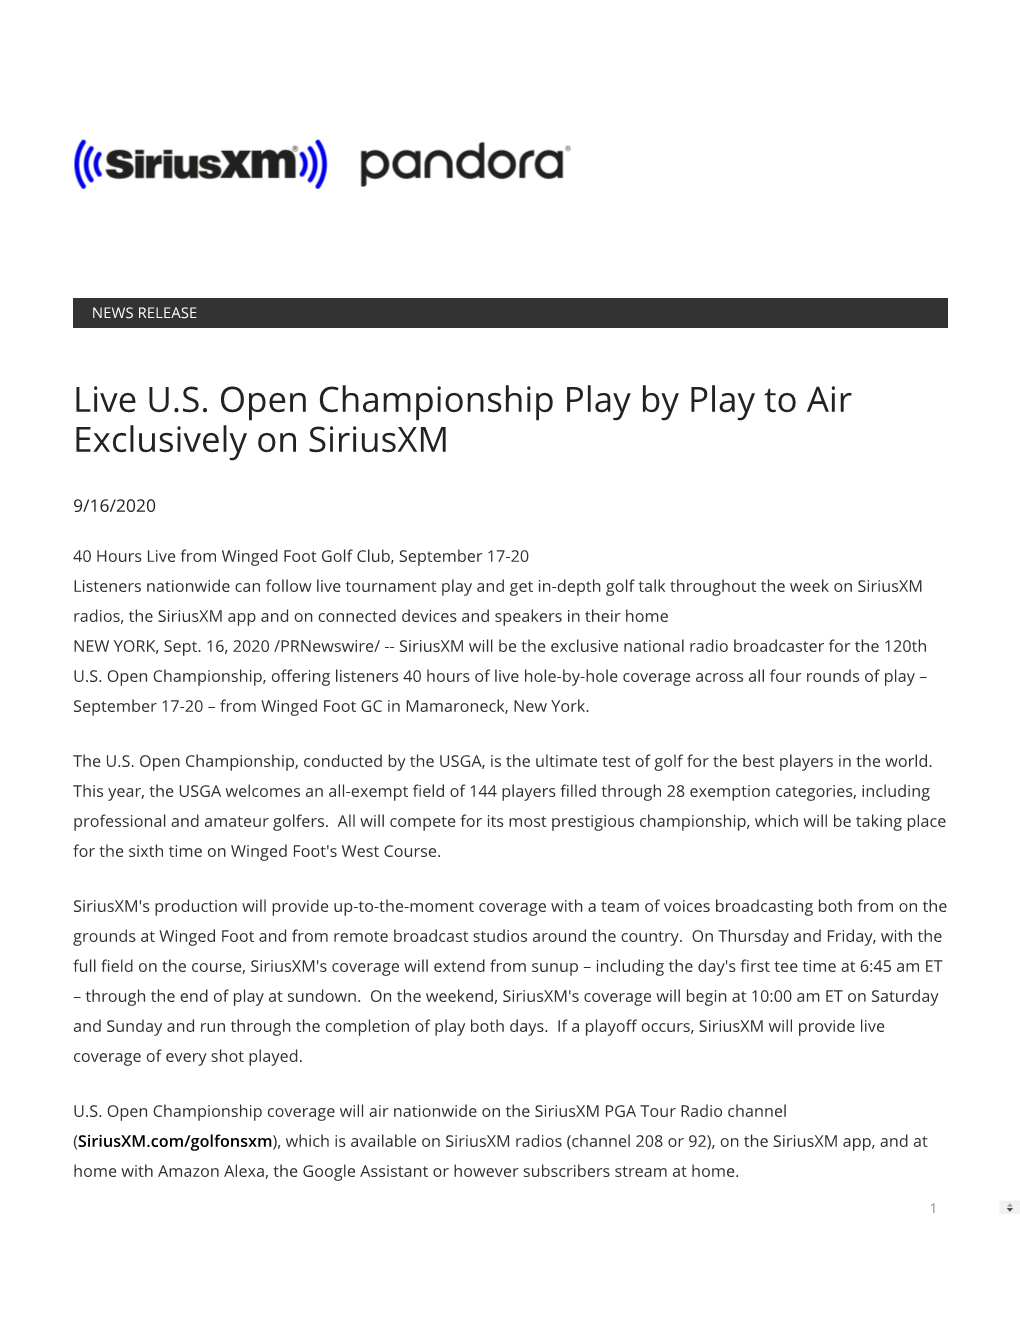 Live U.S. Open Championship Play by Play to Air Exclusively on Siriusxm